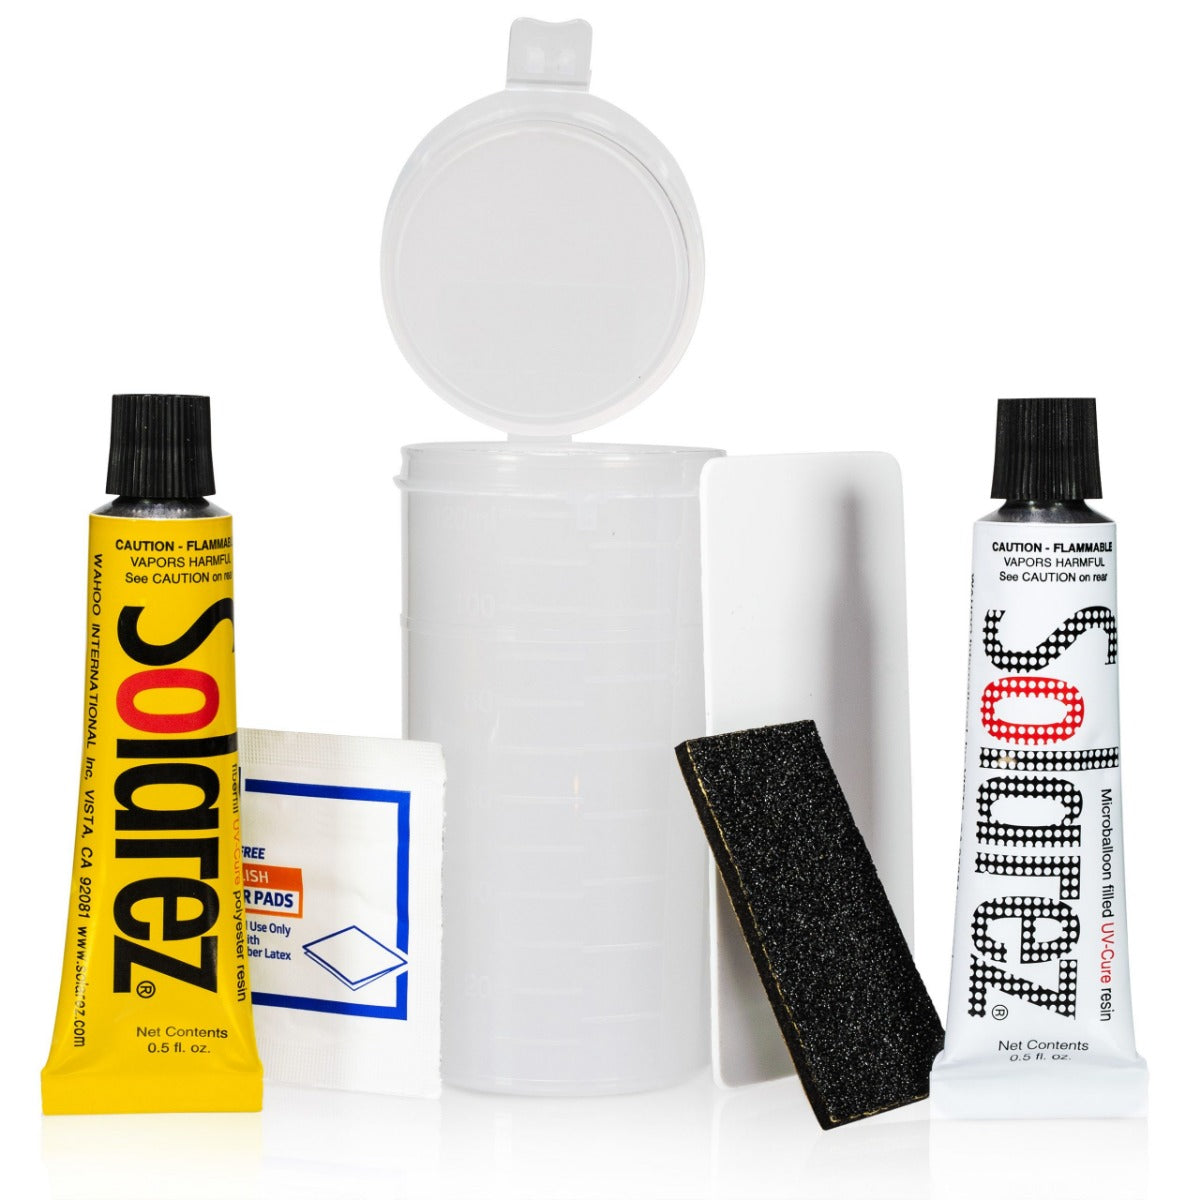 Polyester-surfboard-travel-repair-kit-solarez-contents